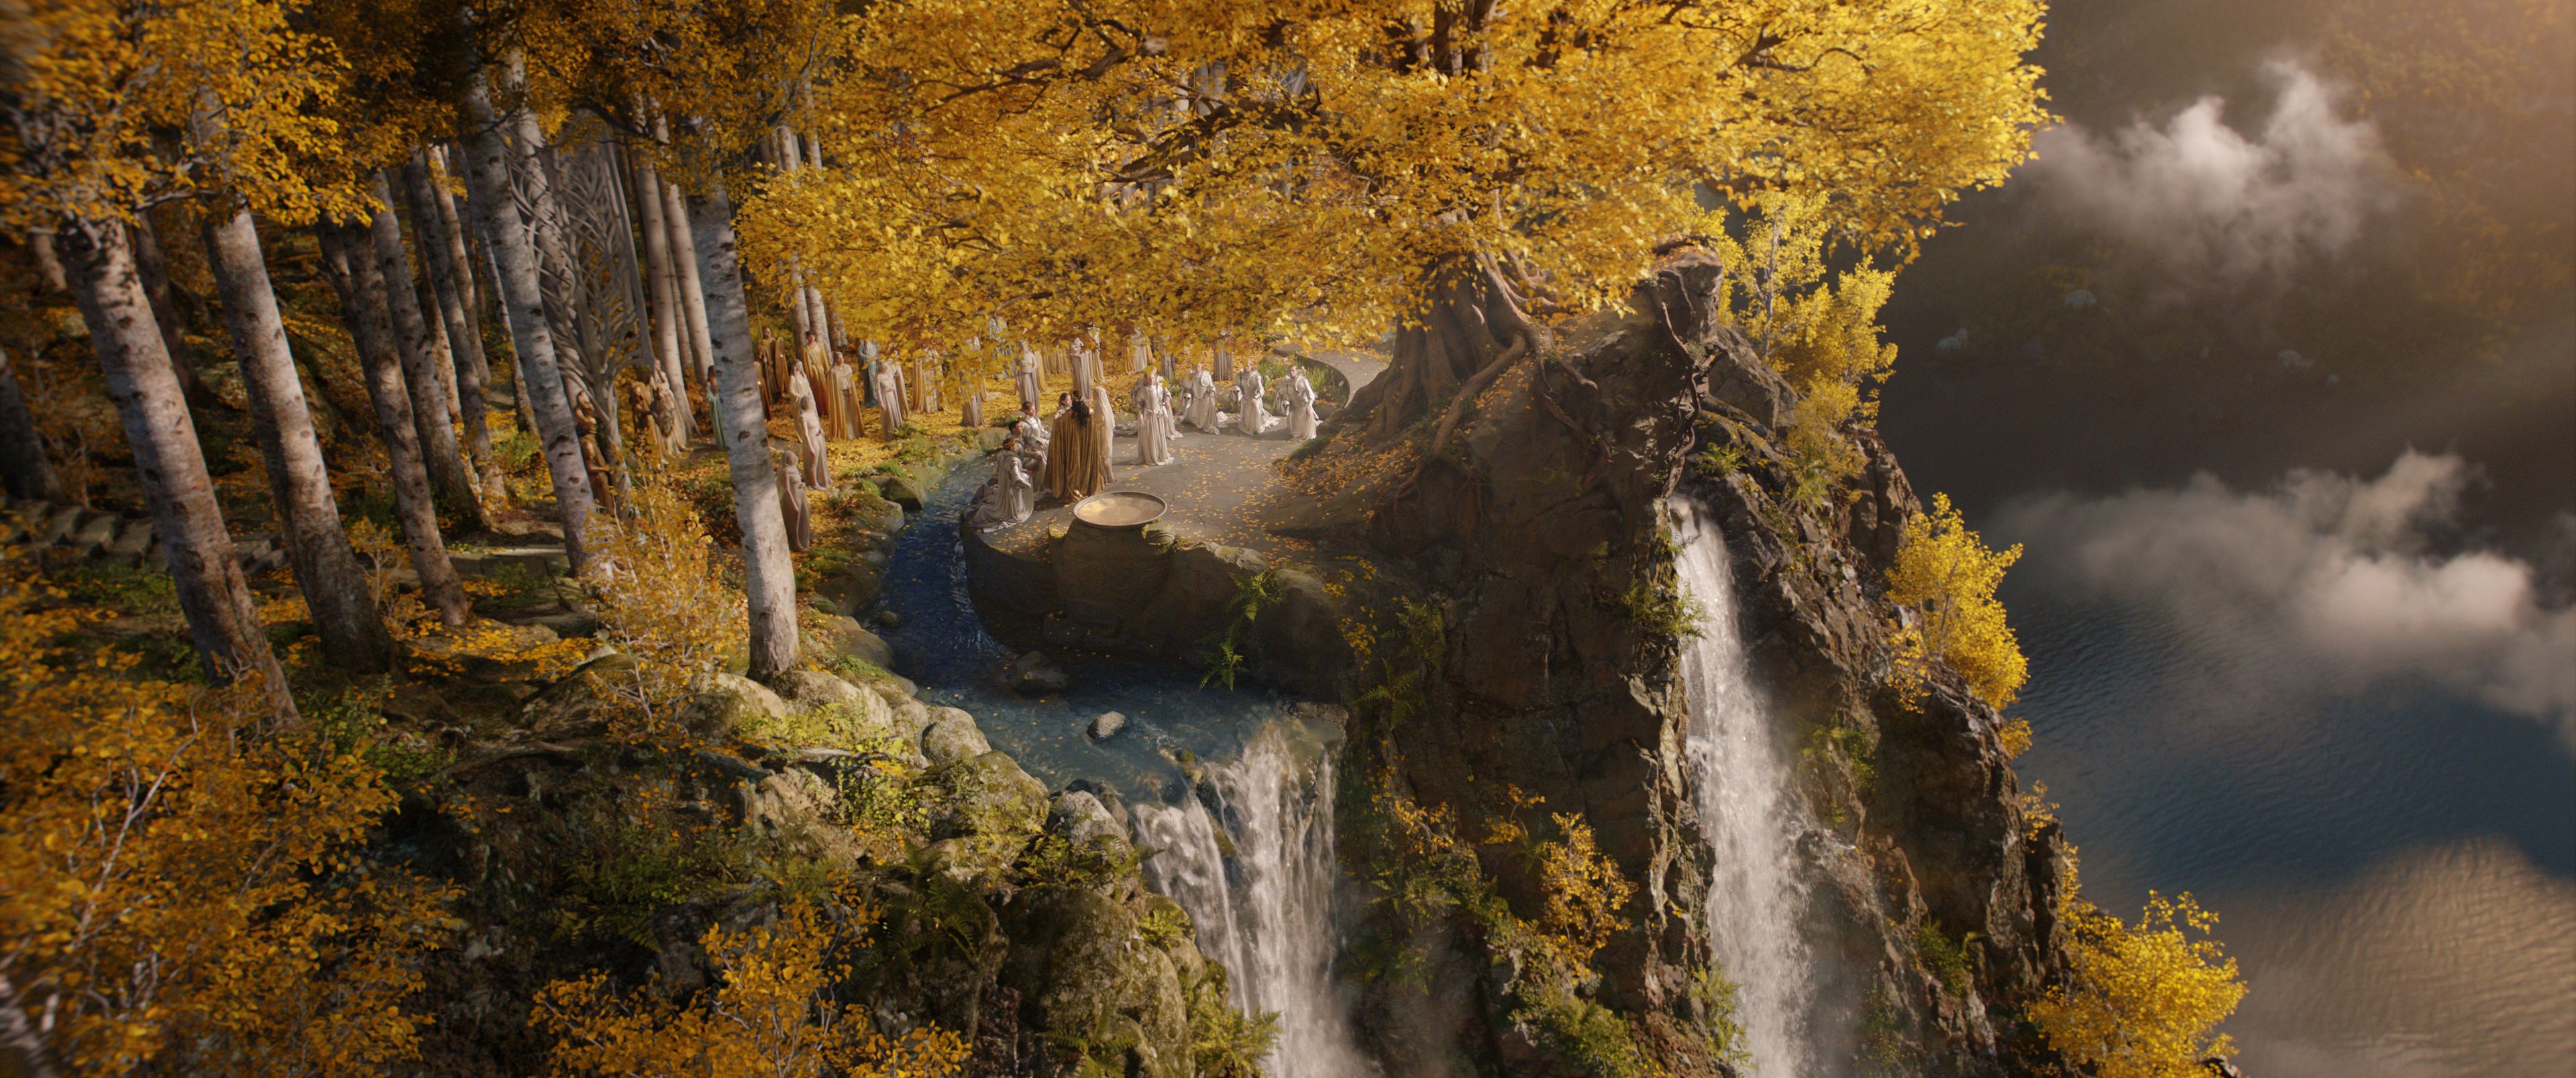 The Lord of the Rings: The Rings of Power' Trailer, Explained